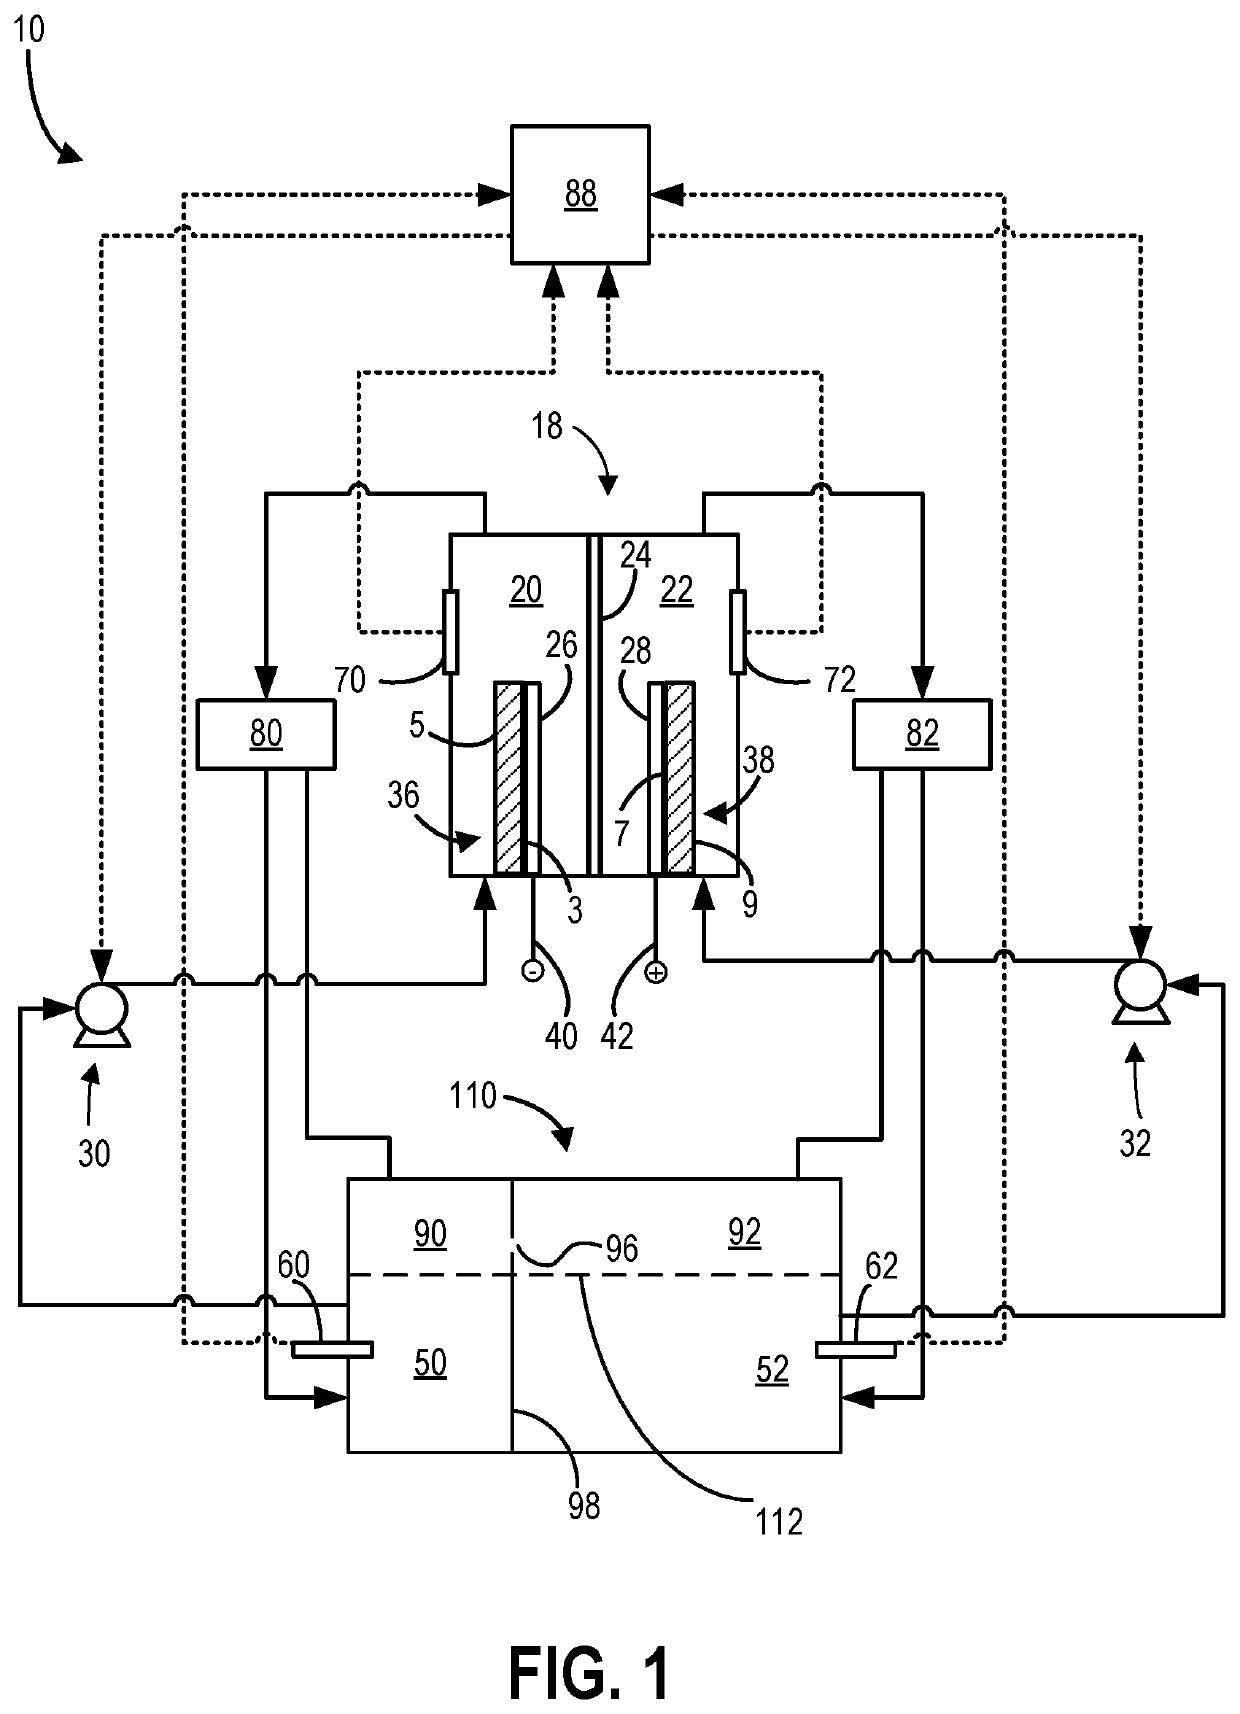 Methods and system for manufacturing a redox flow battery system by roll-to-roll processing